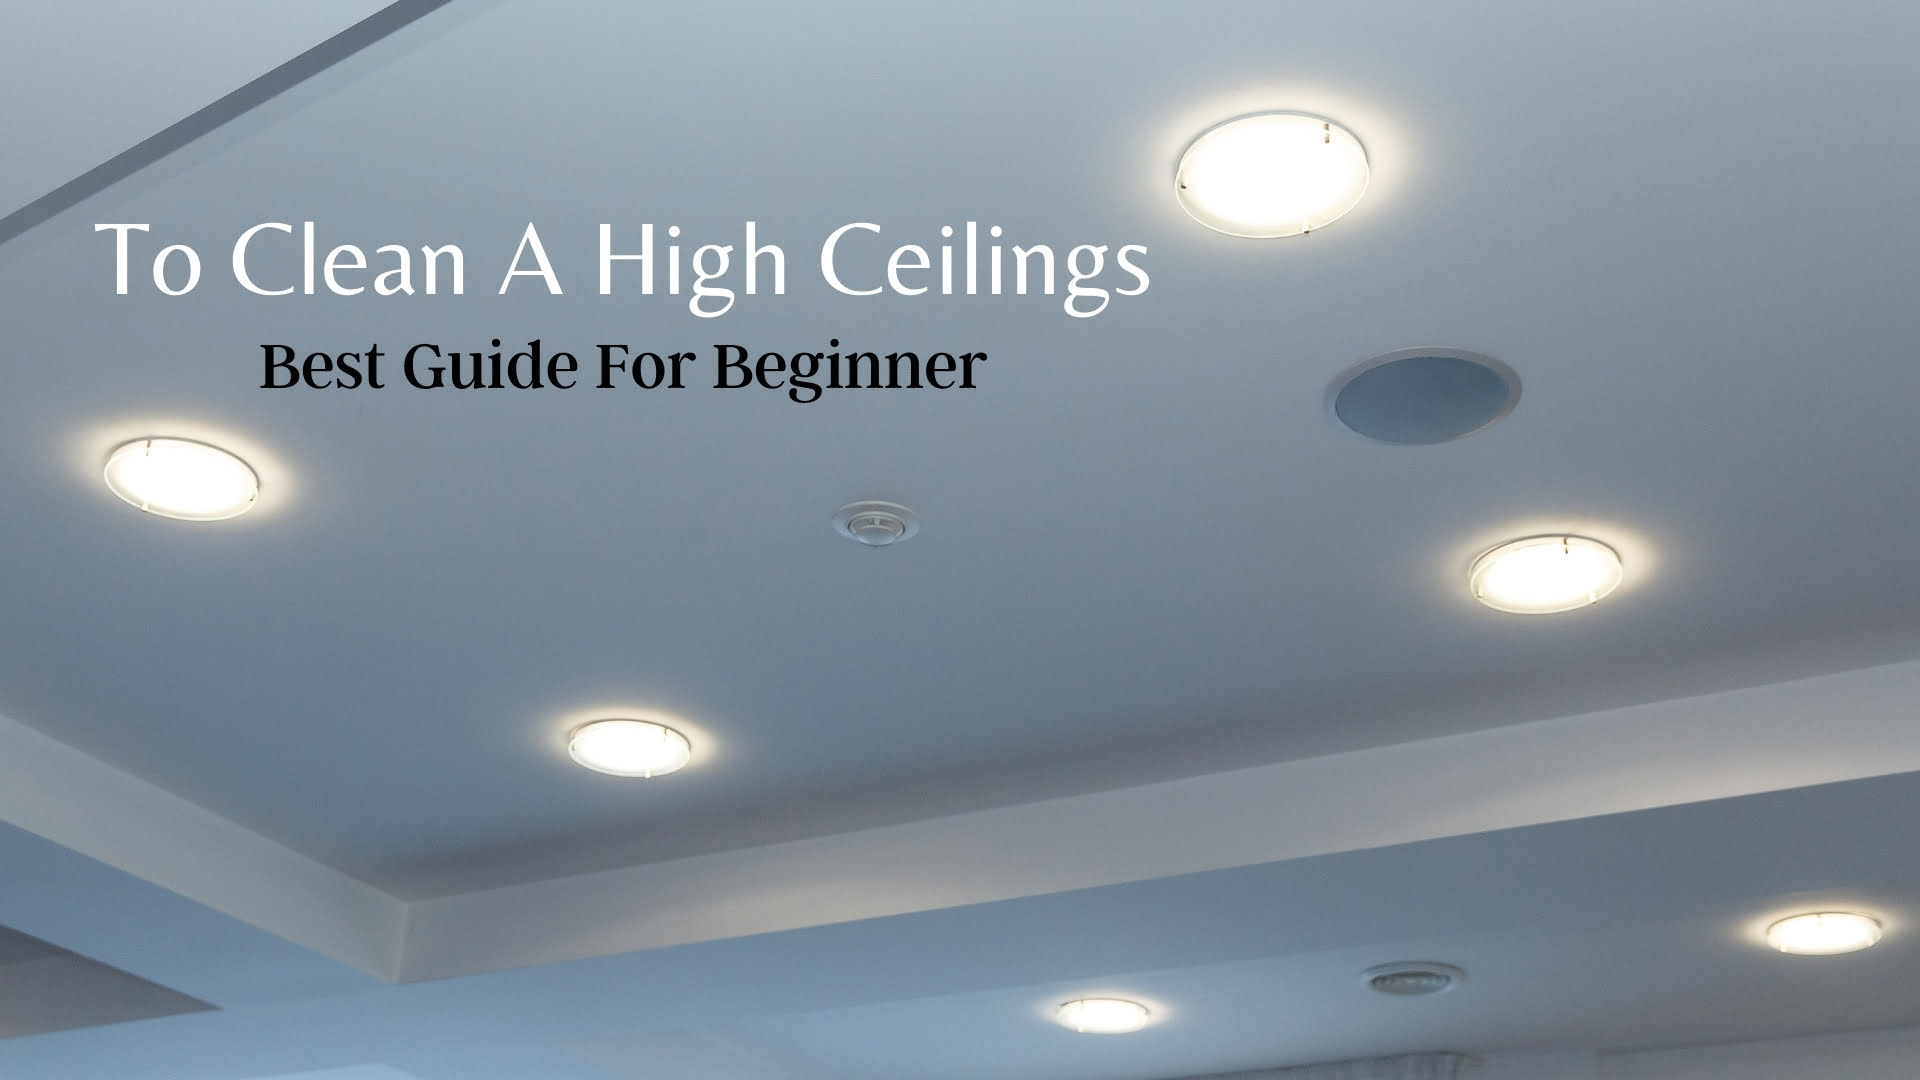 How To Clean Tall Ceilings? Effective Guide for Beginner